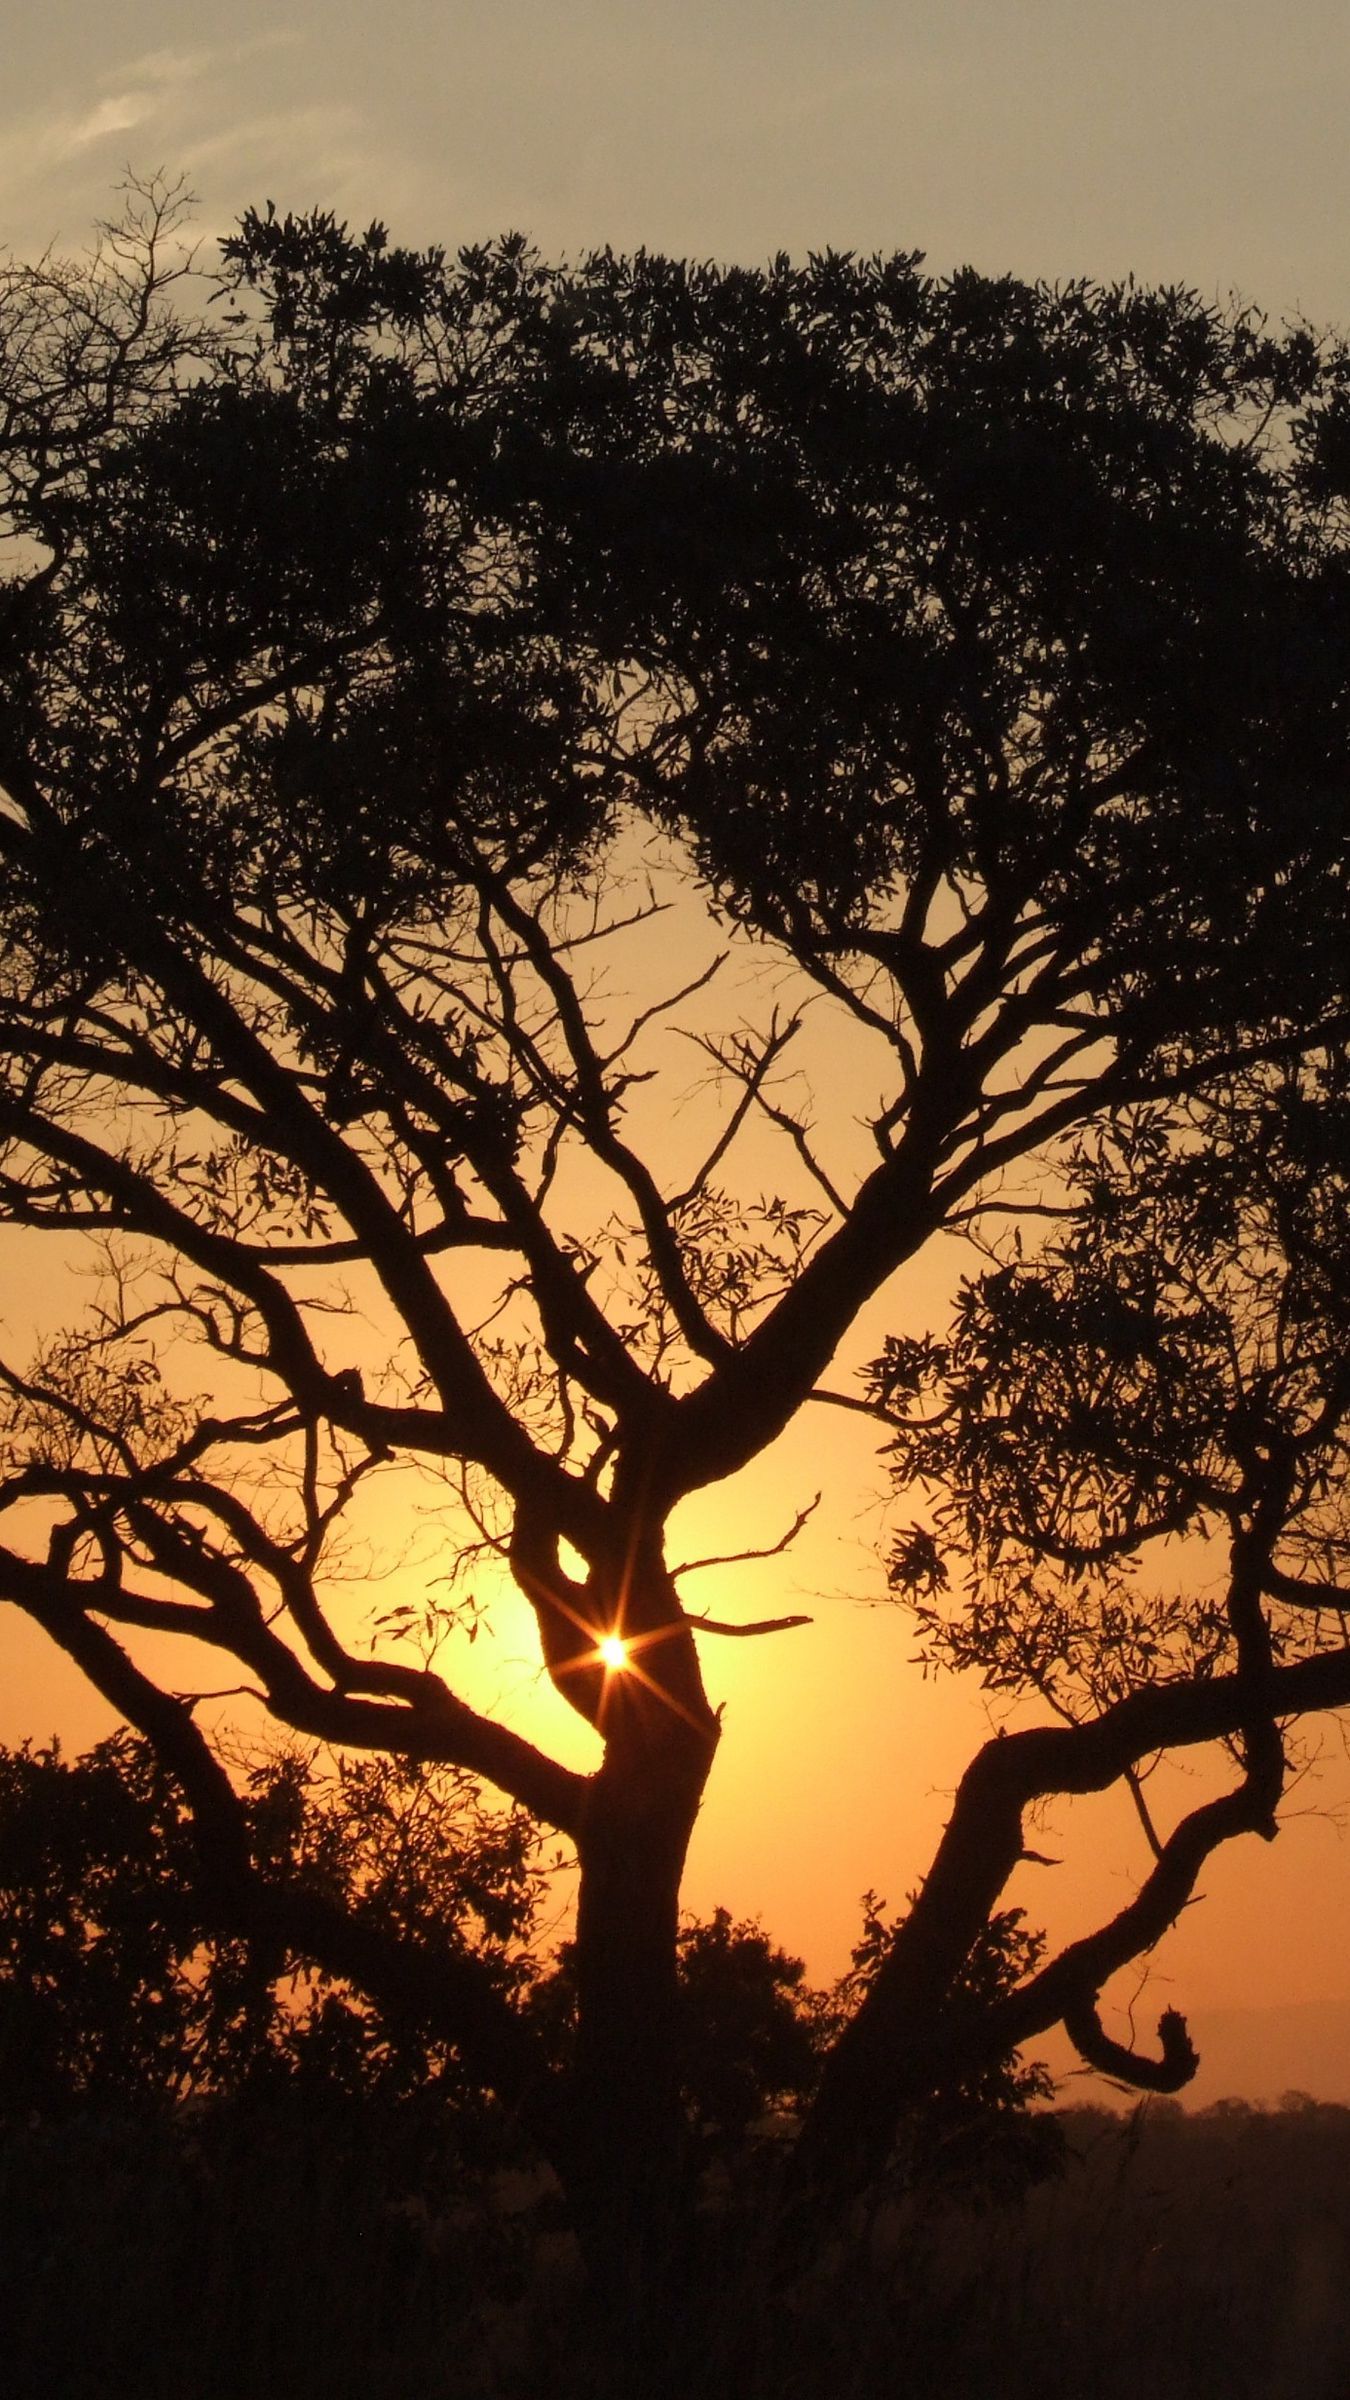 Download wallpaper 1350x2400 africa, sunset, trees, night iphone